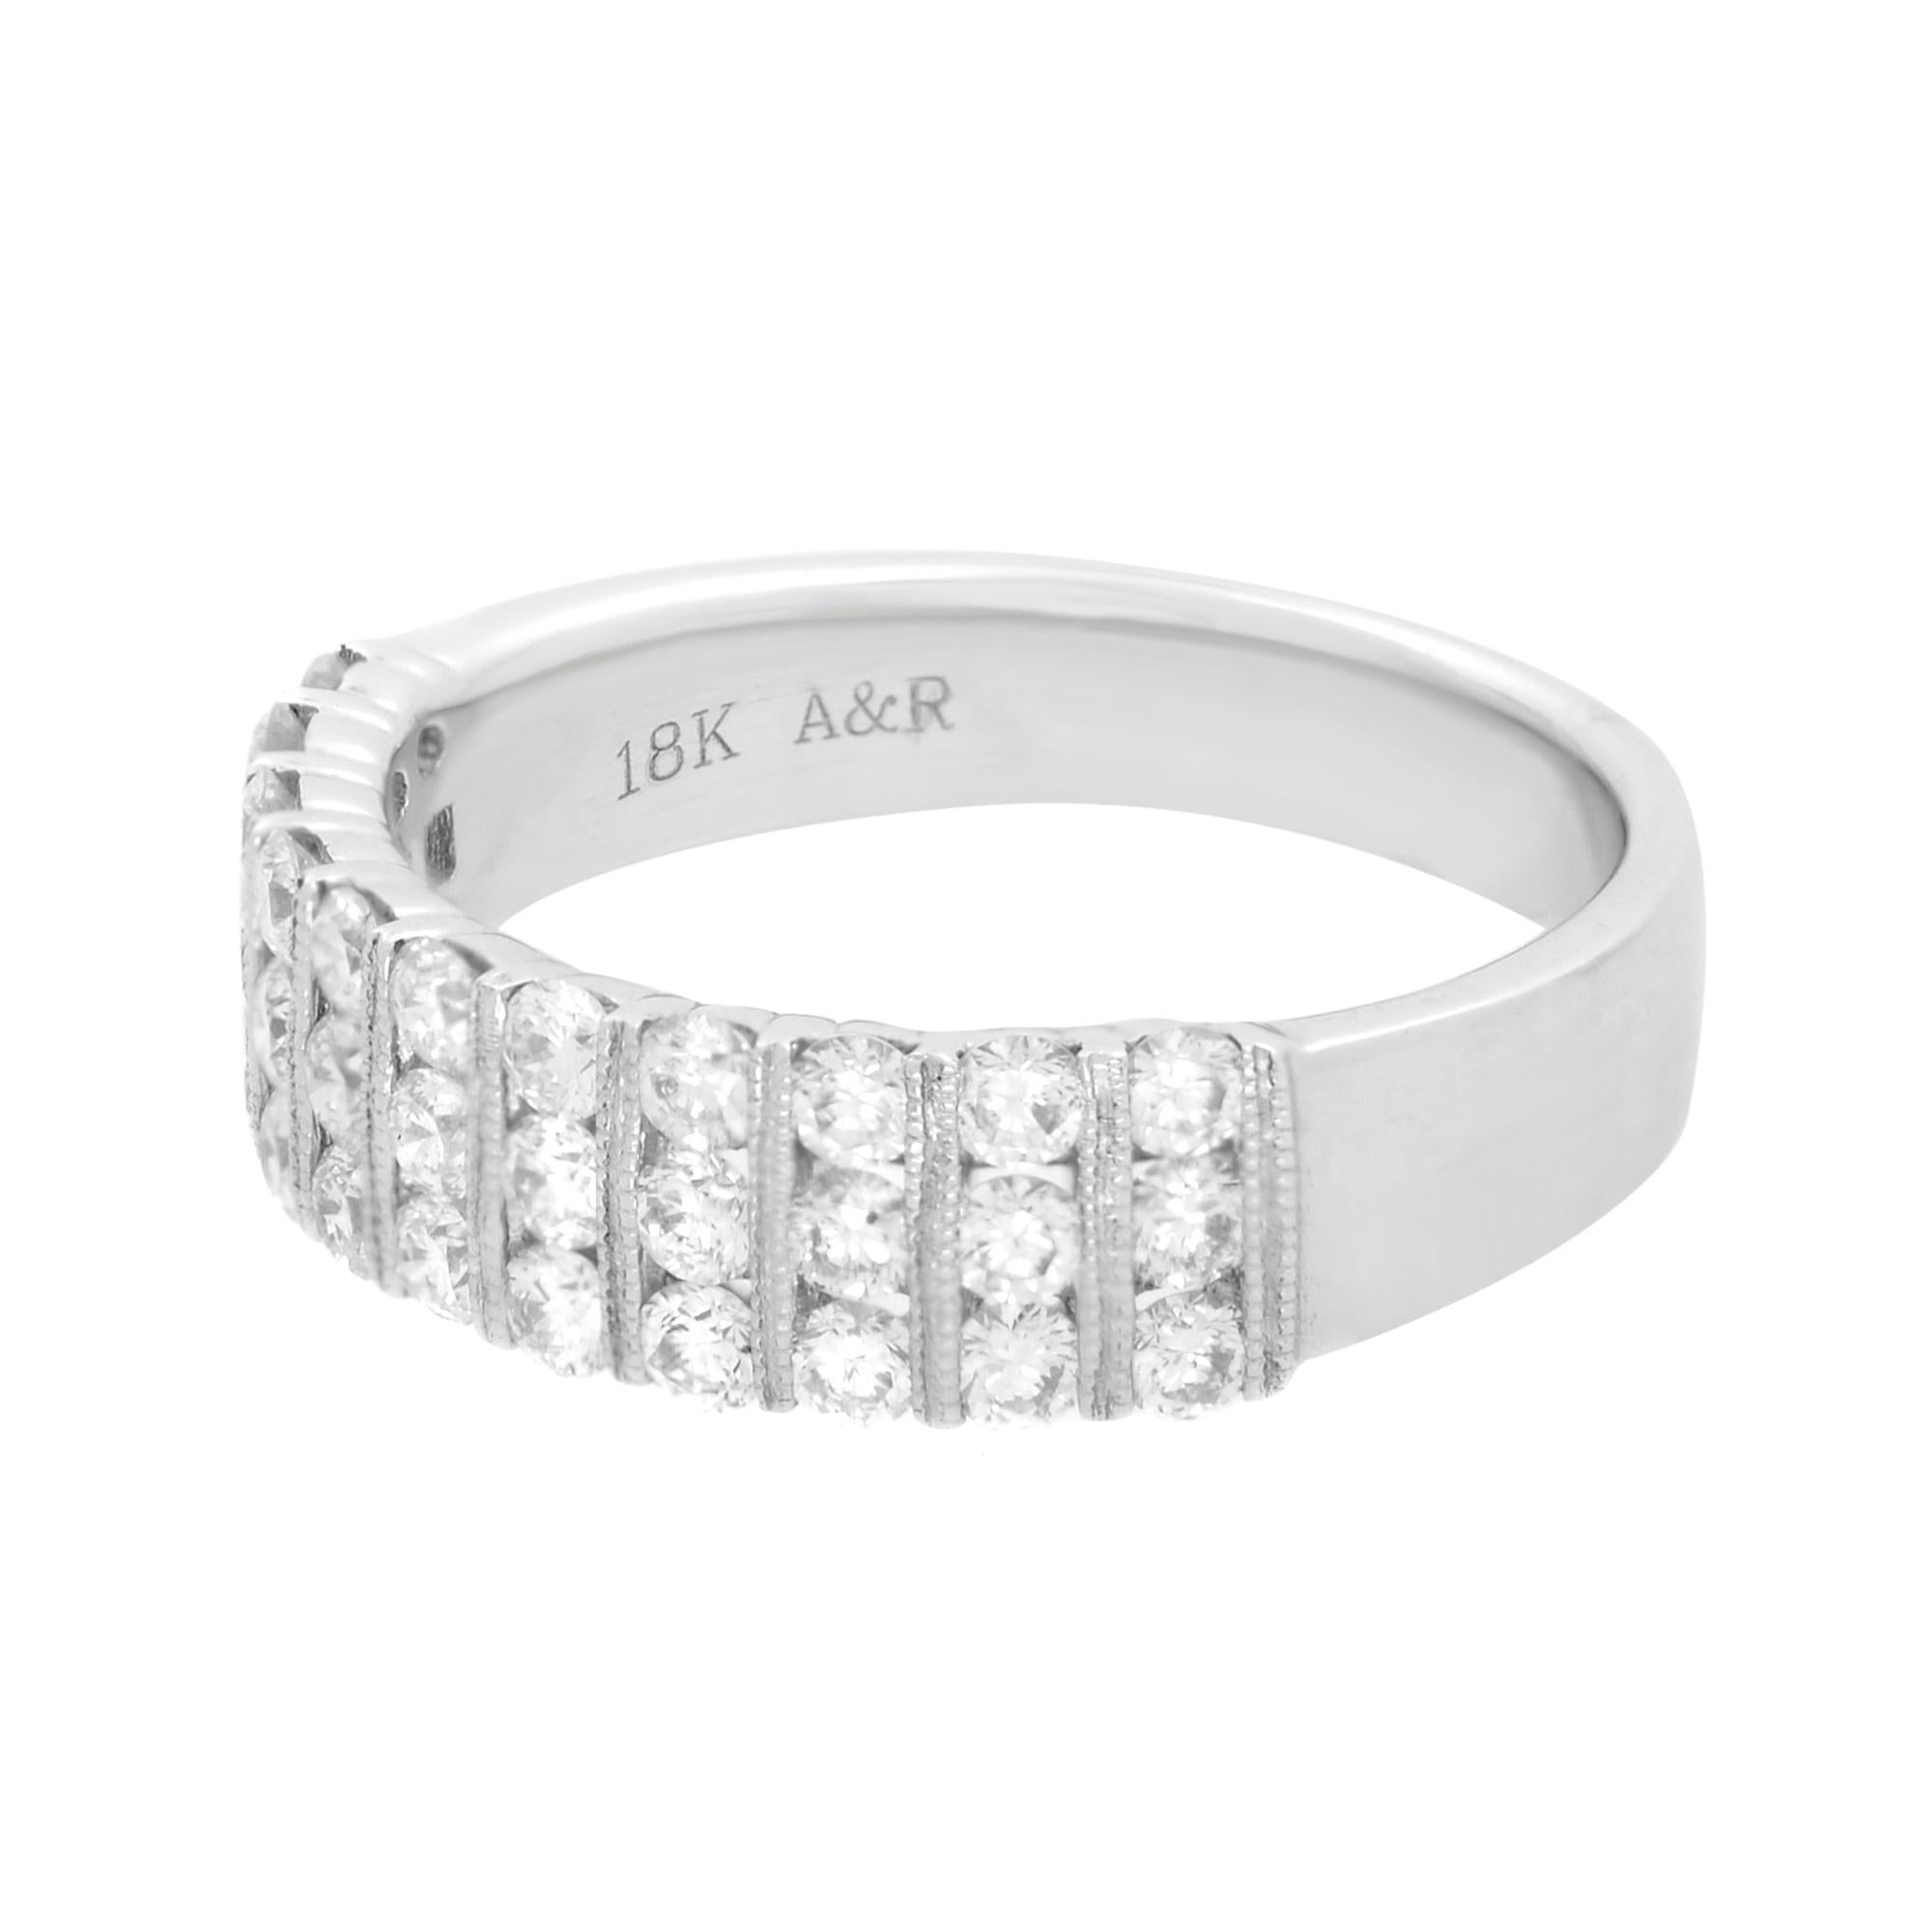 18K white gold channel set diamond milgrain band. A wide band with three rows of channel set diamonds. The milgrain detail on the edges make this ring stand out from many others. A great statement ring or alternative wedding band. Total diamond